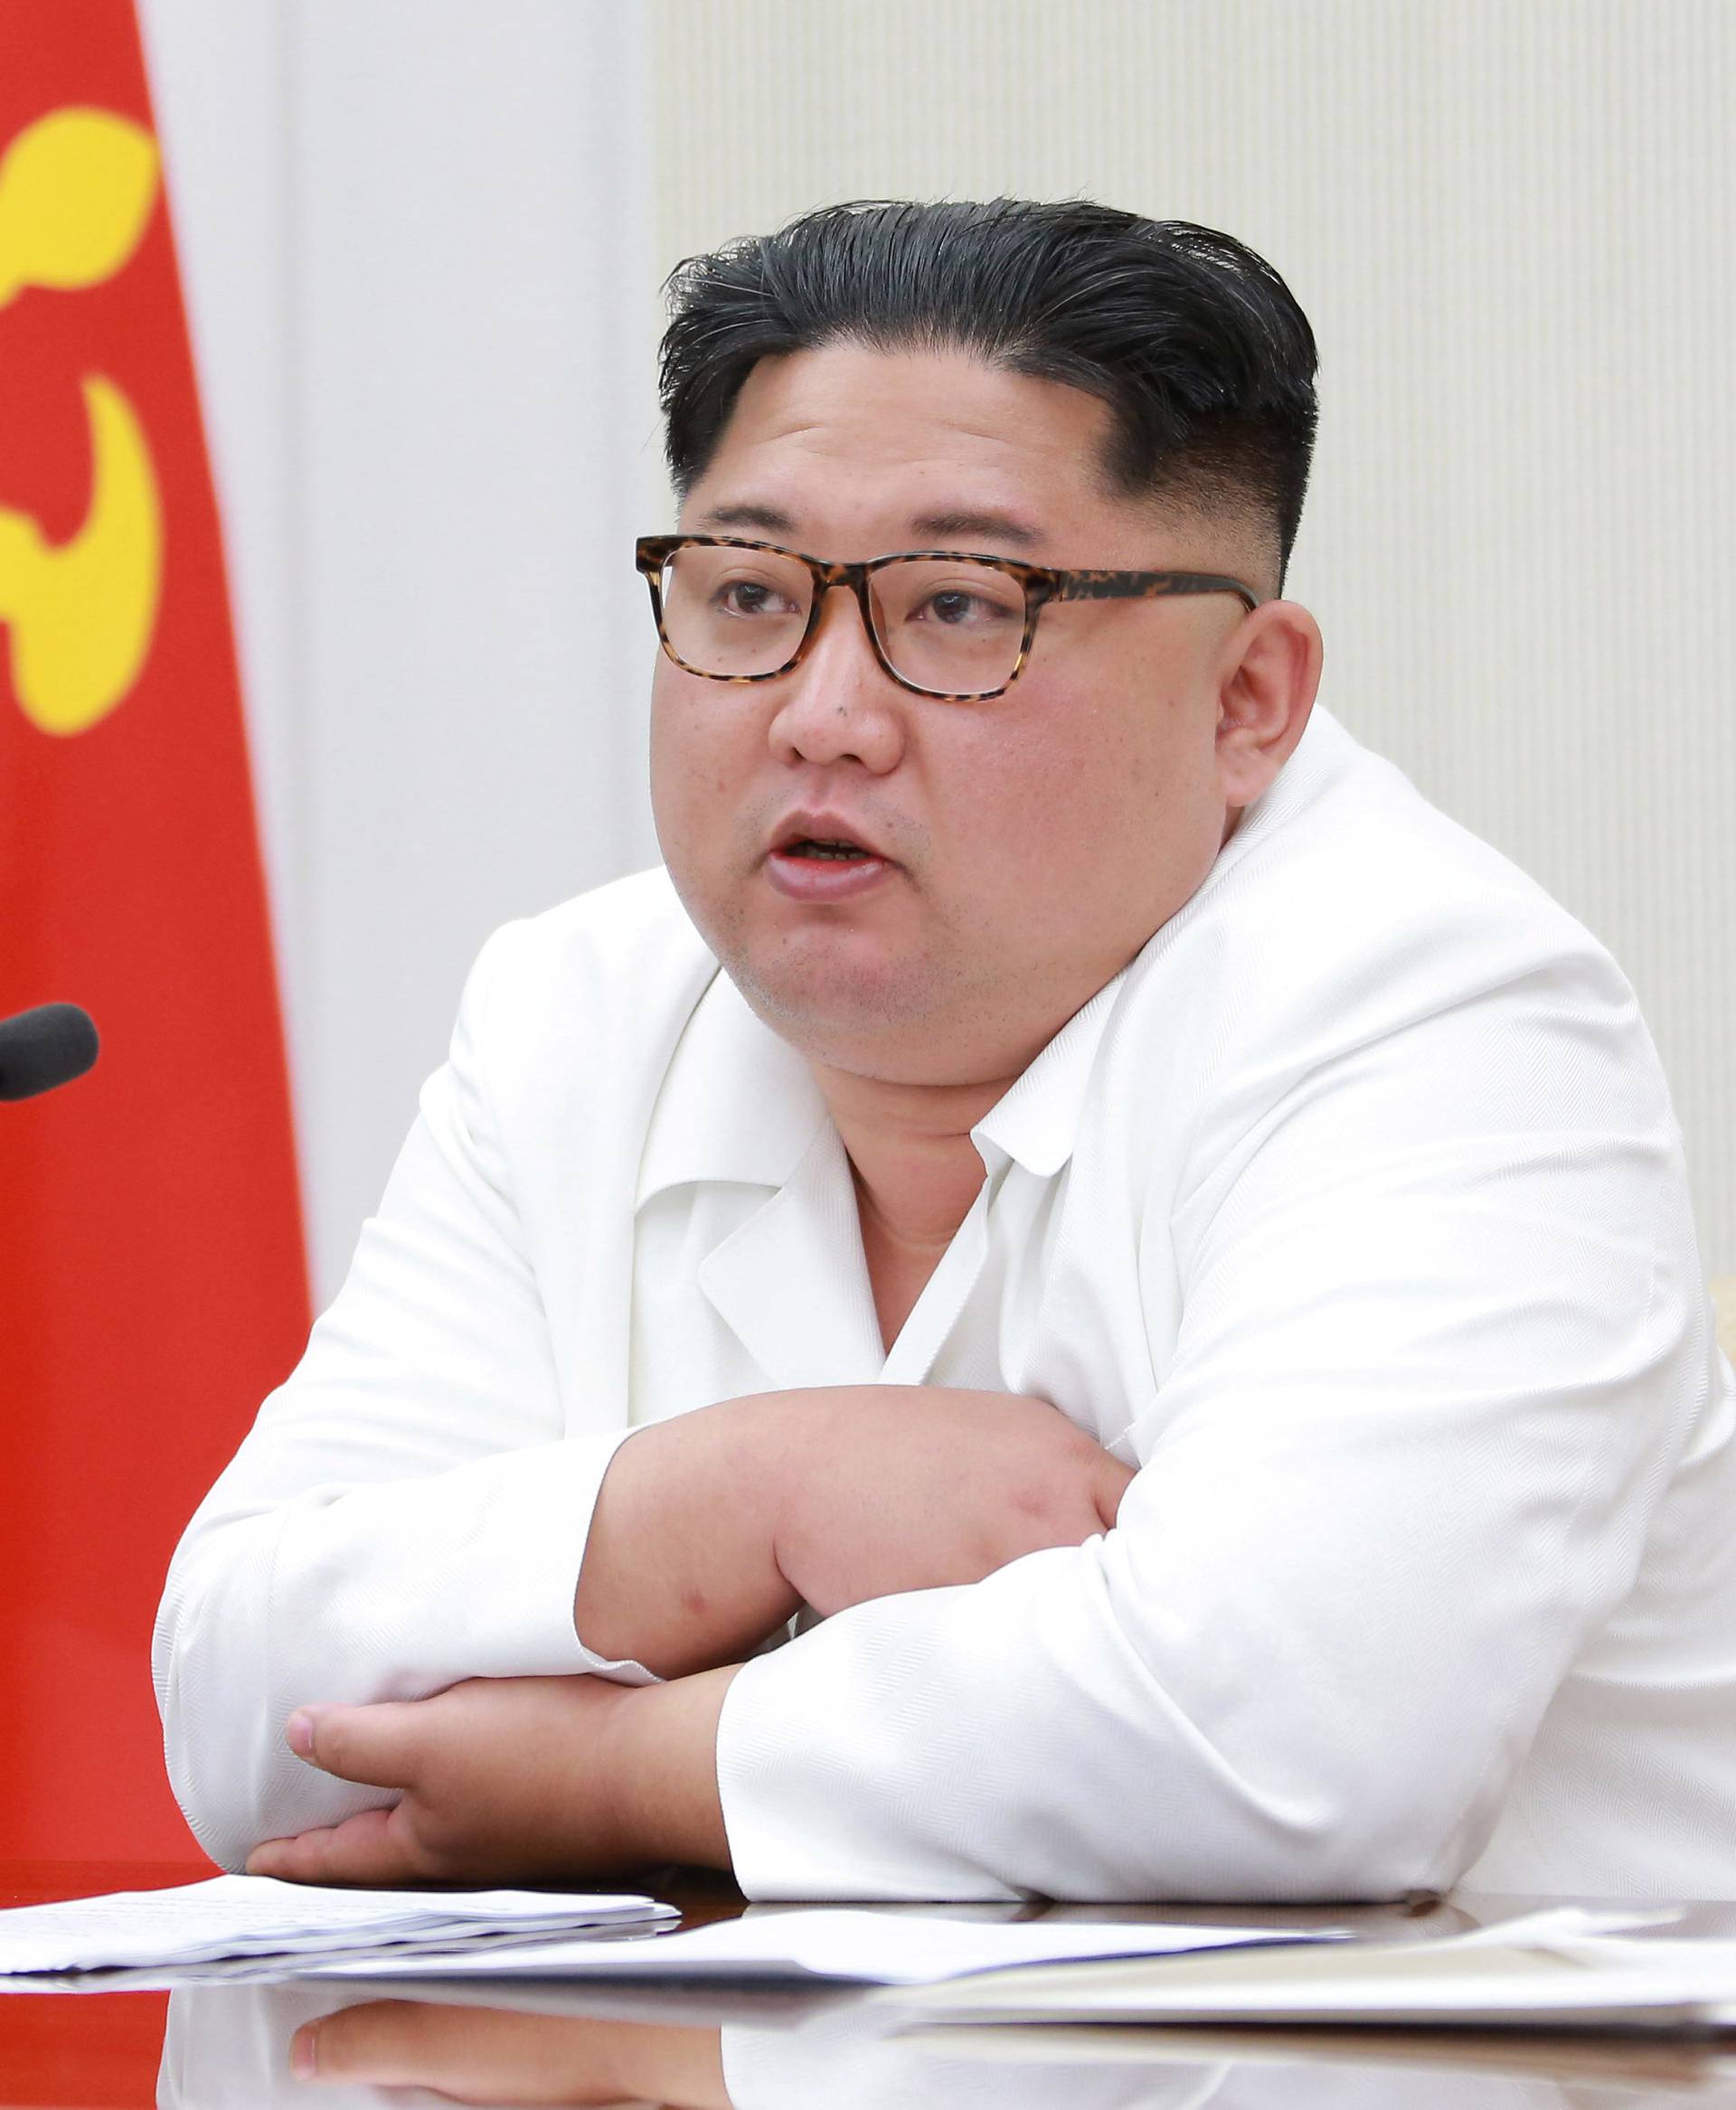 North Korean leader Kim Jong Un speaks during the first enlarged meeting of the seventh Central Military Commission of the Workers' Party of Korea in Pyongyang